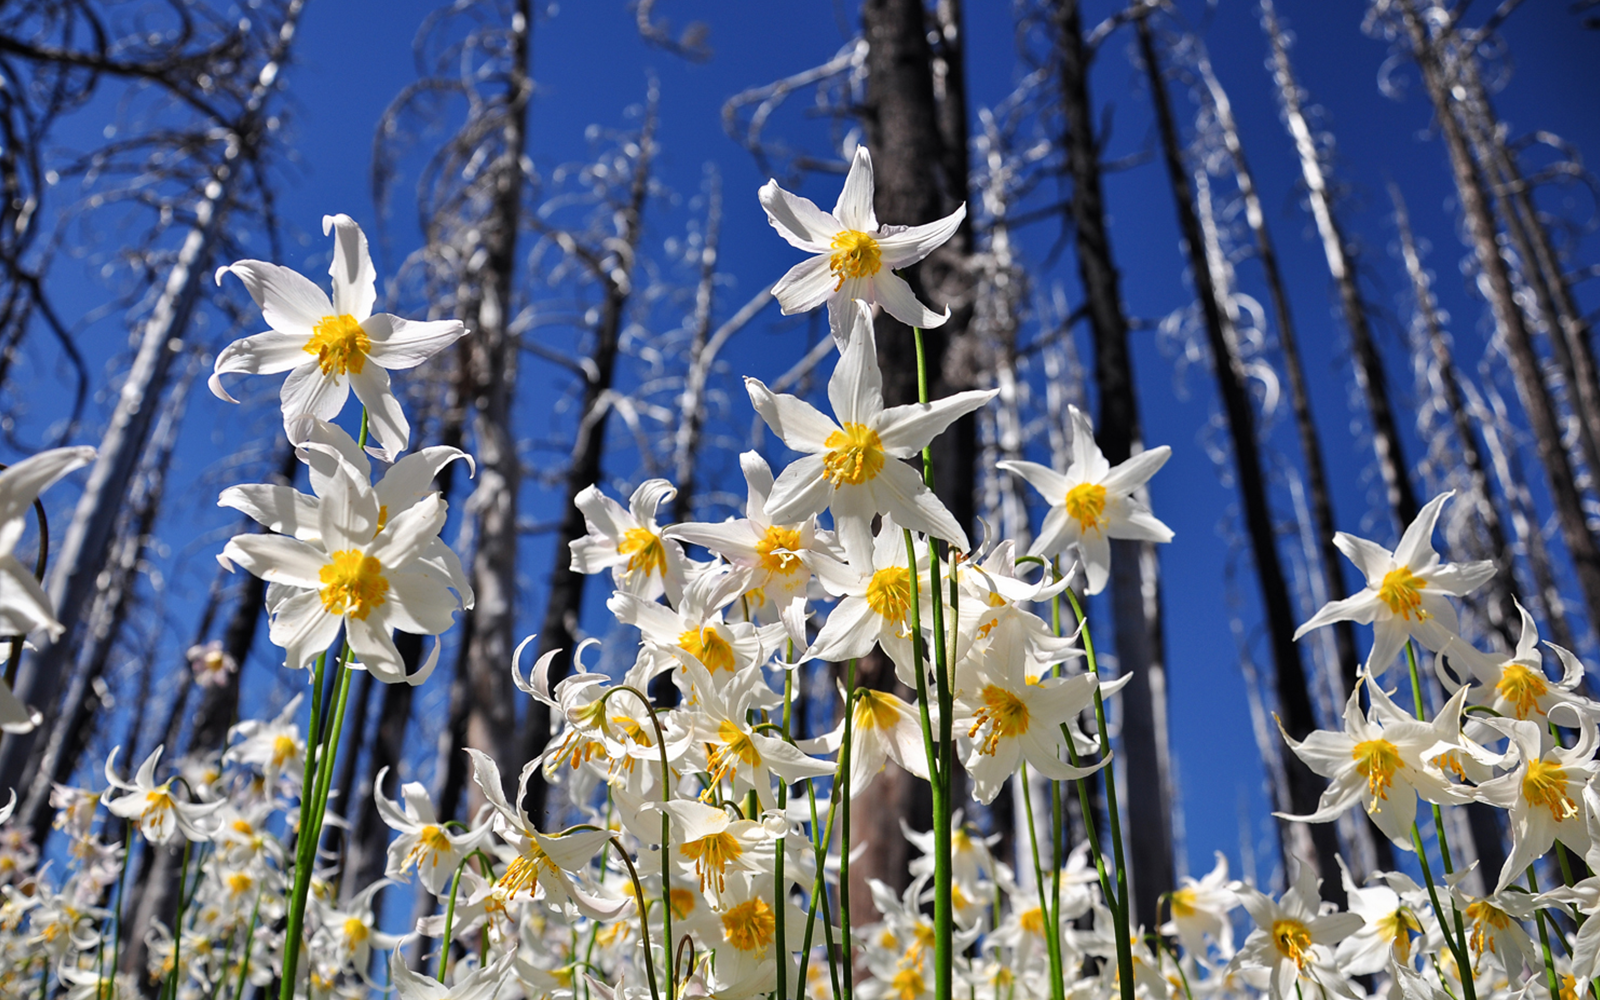 BLOG: After the Fires, the Birds and the Blooms